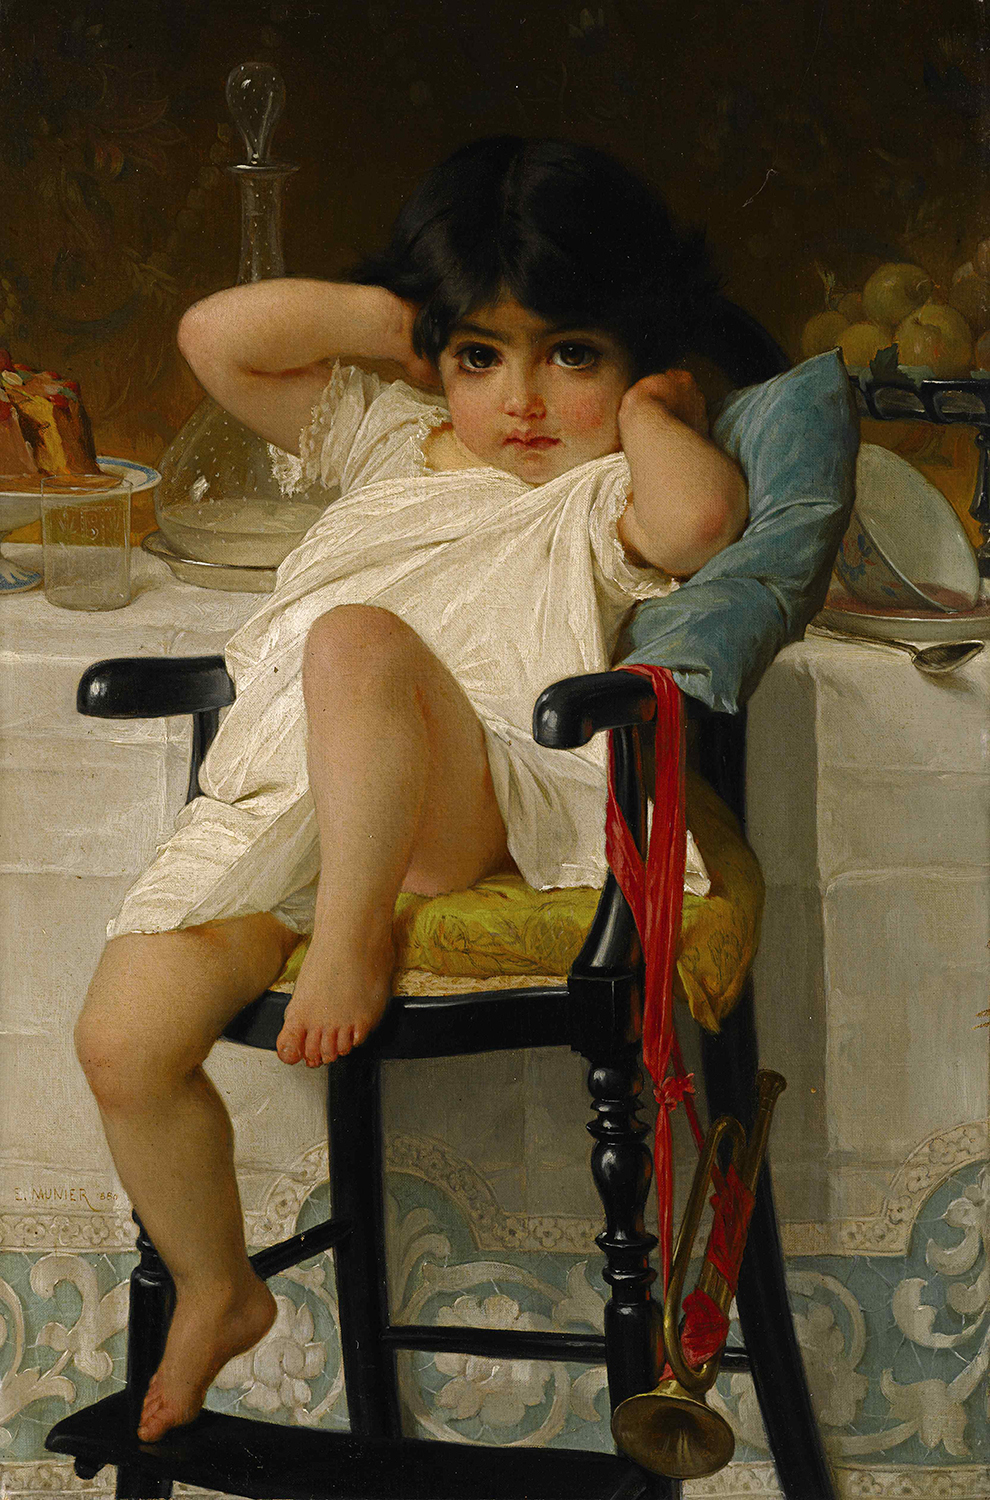 A young girl in a chair by a table